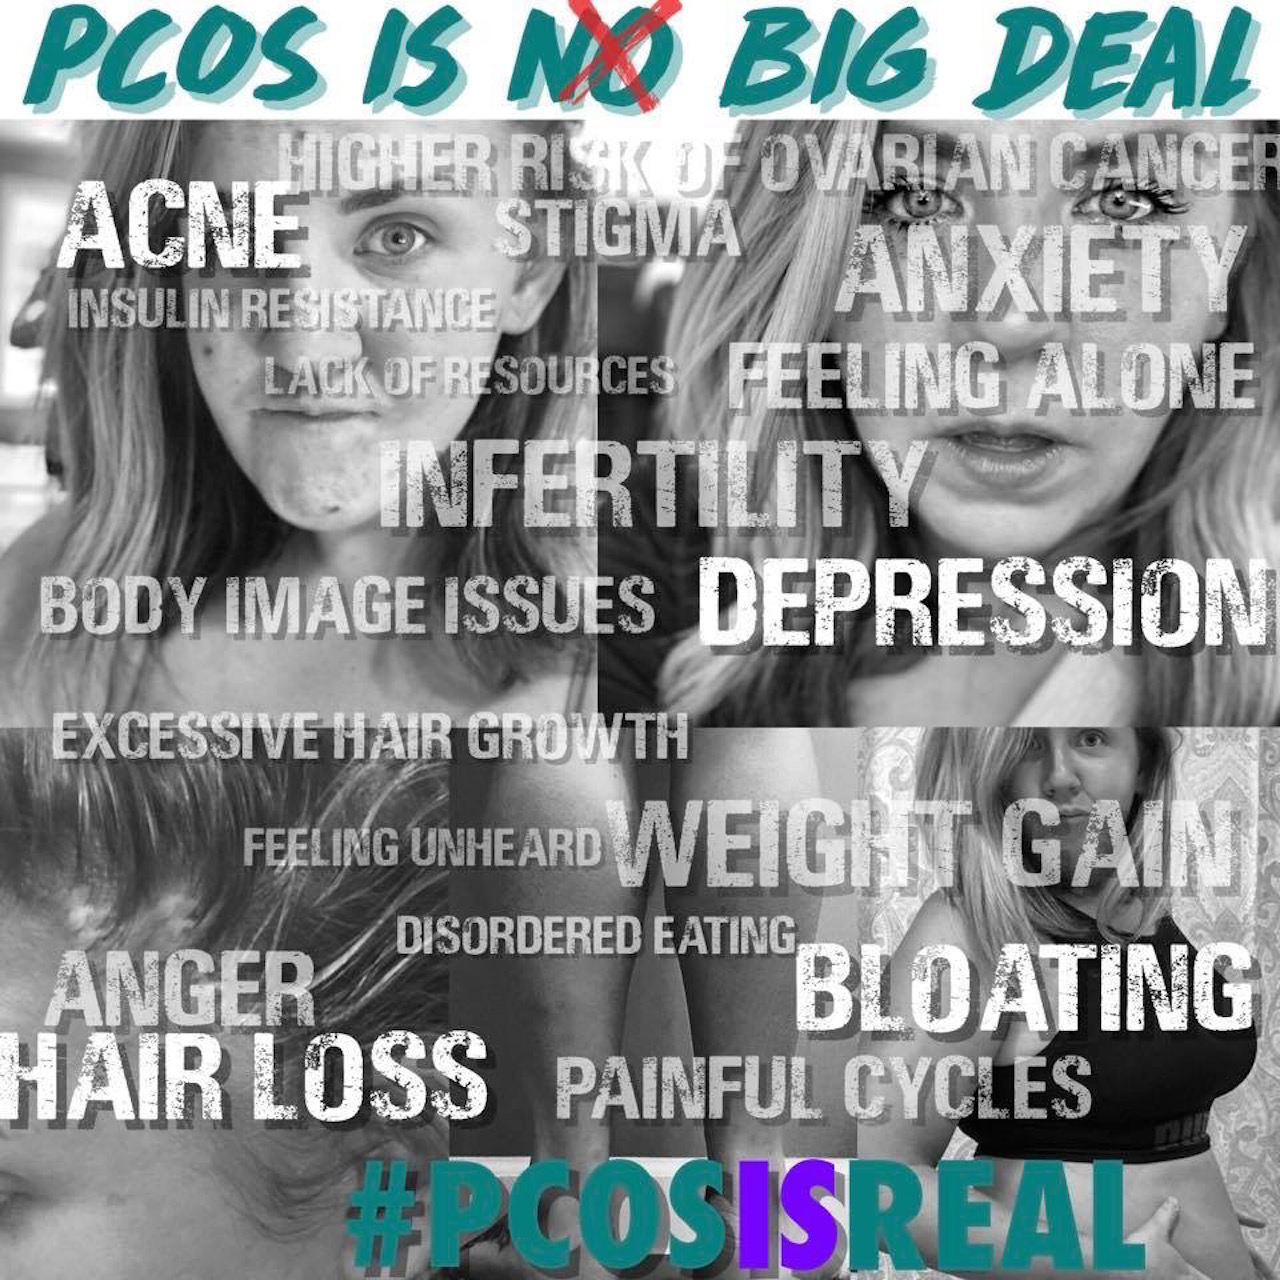 A picture of a woman with pictures of her, and words listing symptoms of PCOS written above her image.